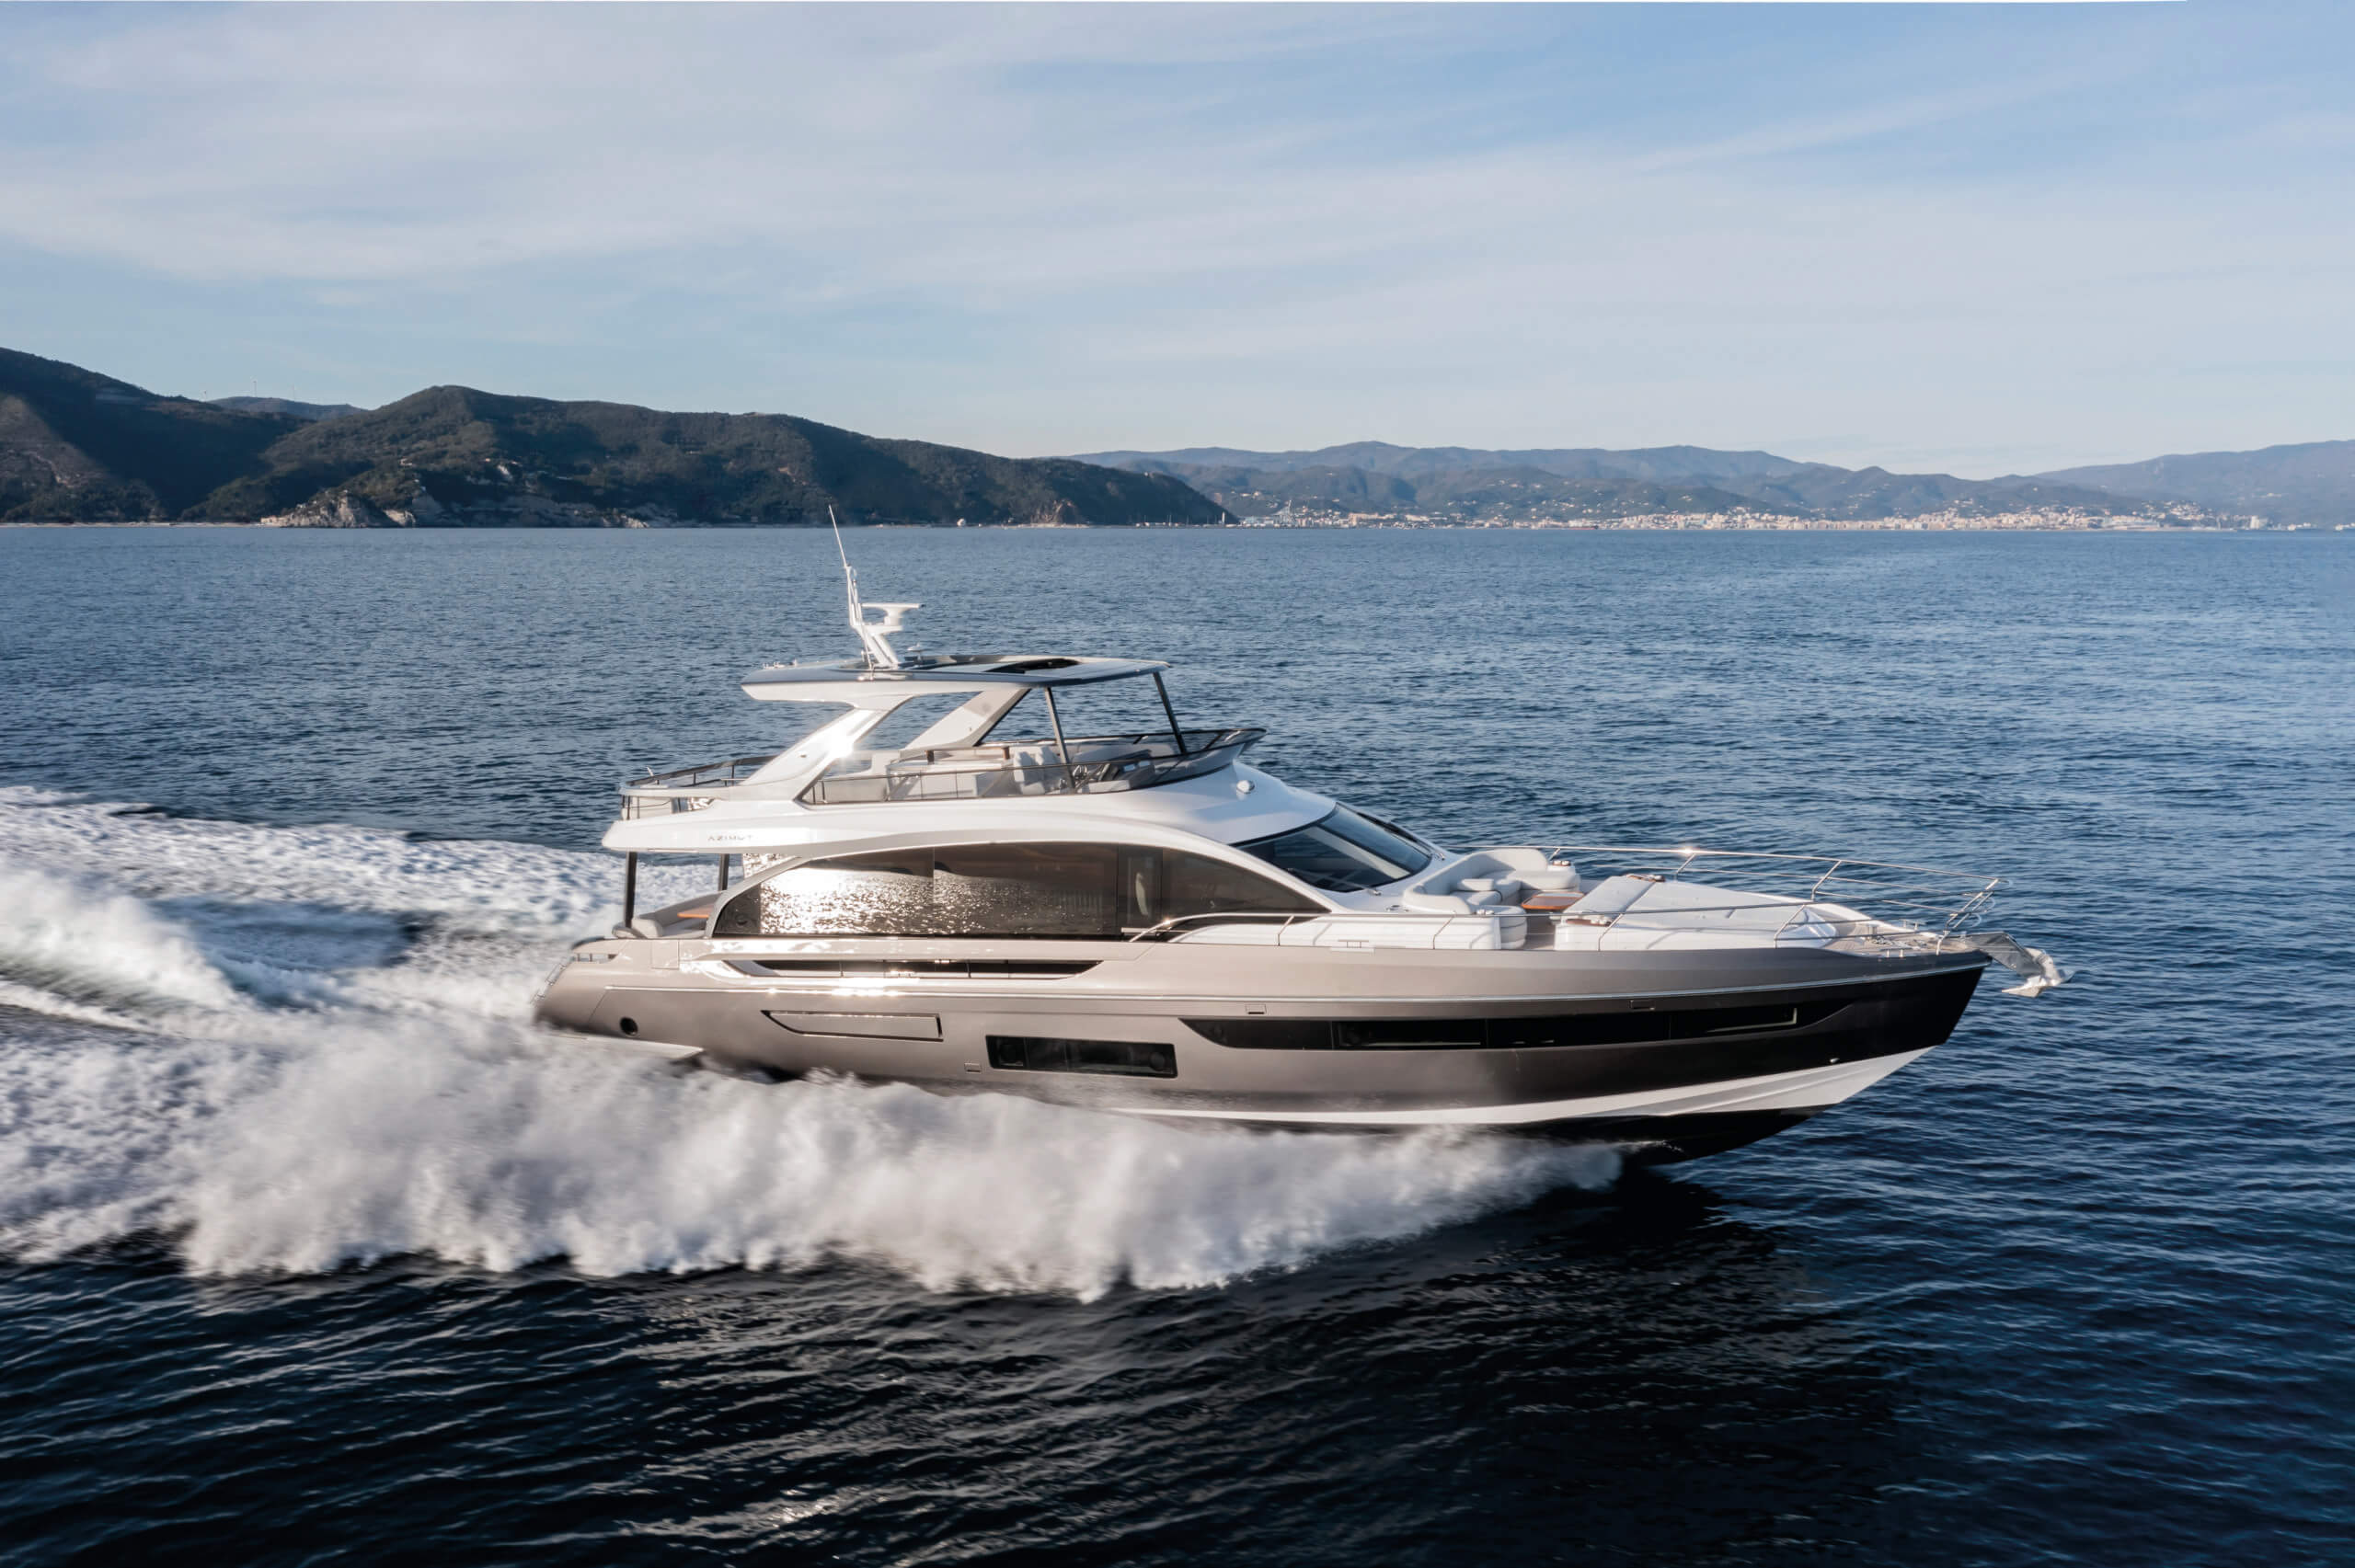 AZIMUT FLY 72: NEW IMAGES AVAILABLE